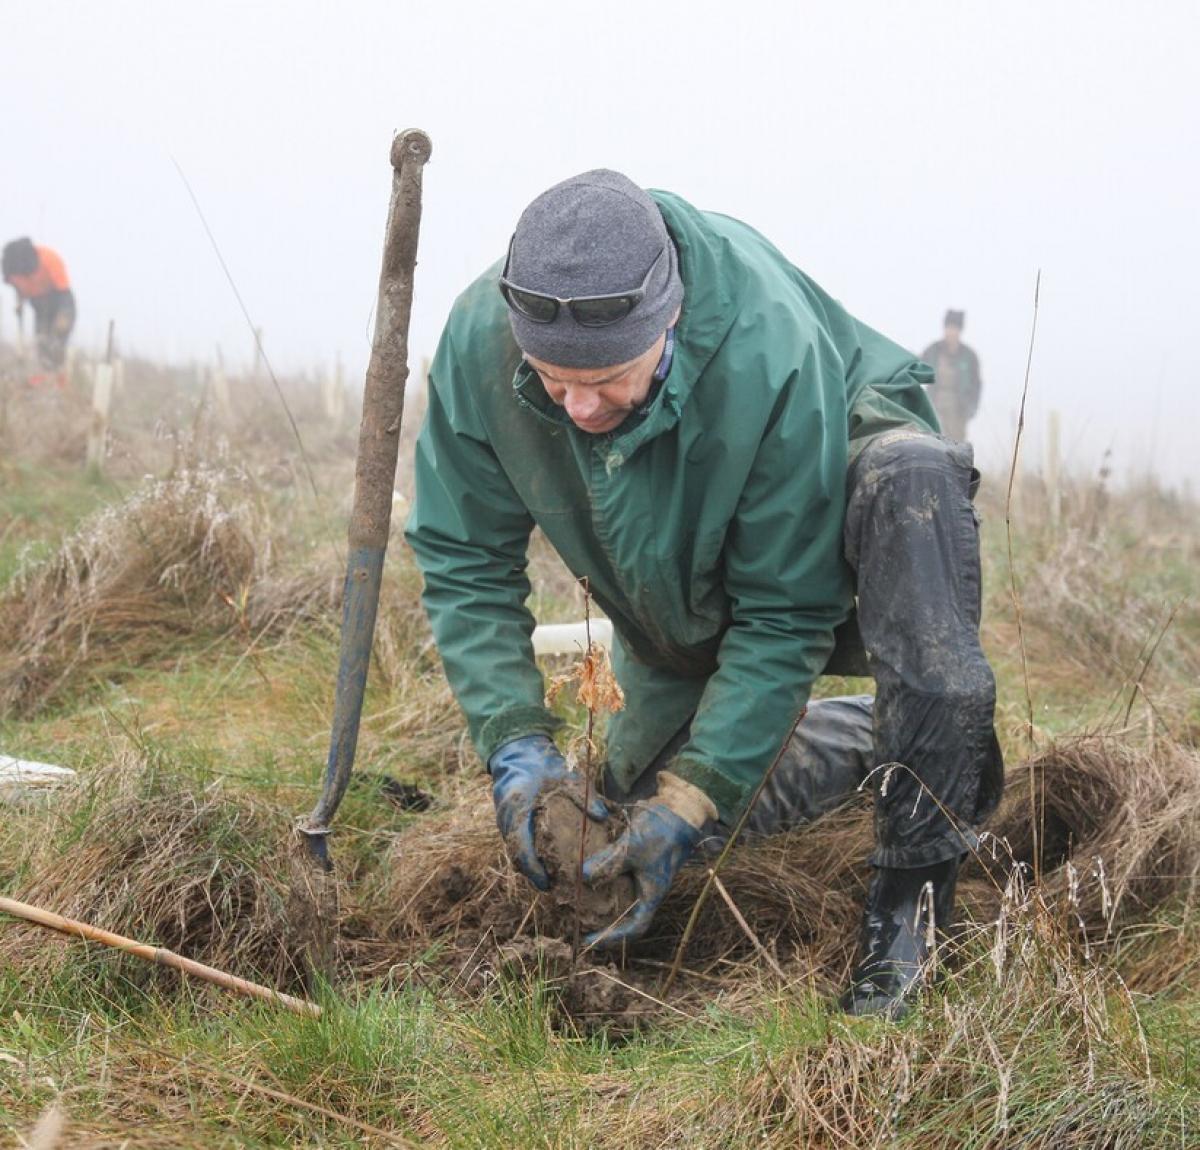 A male volunteer crouching down planting a sapling in the ground on a cold and misty day